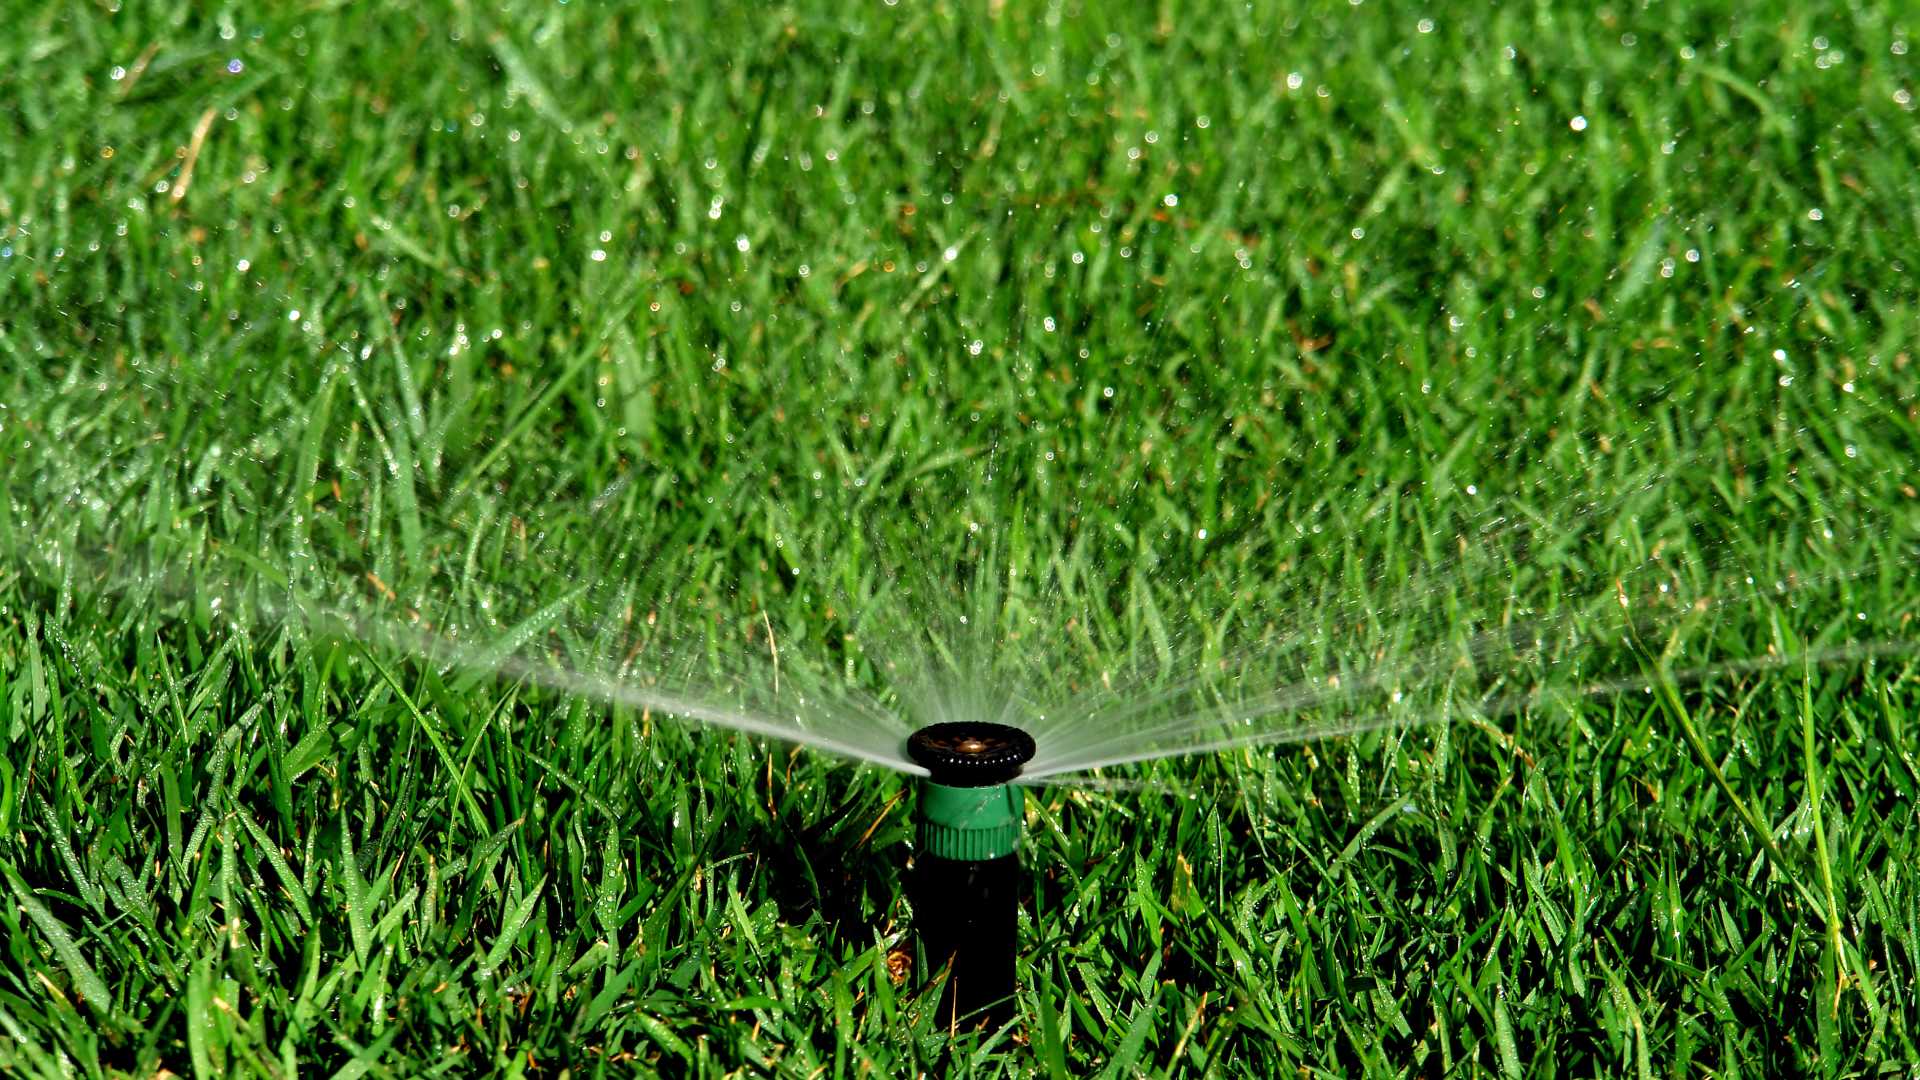 Irrigation sprinkler system watering lawn in Sioux Falls, SD.